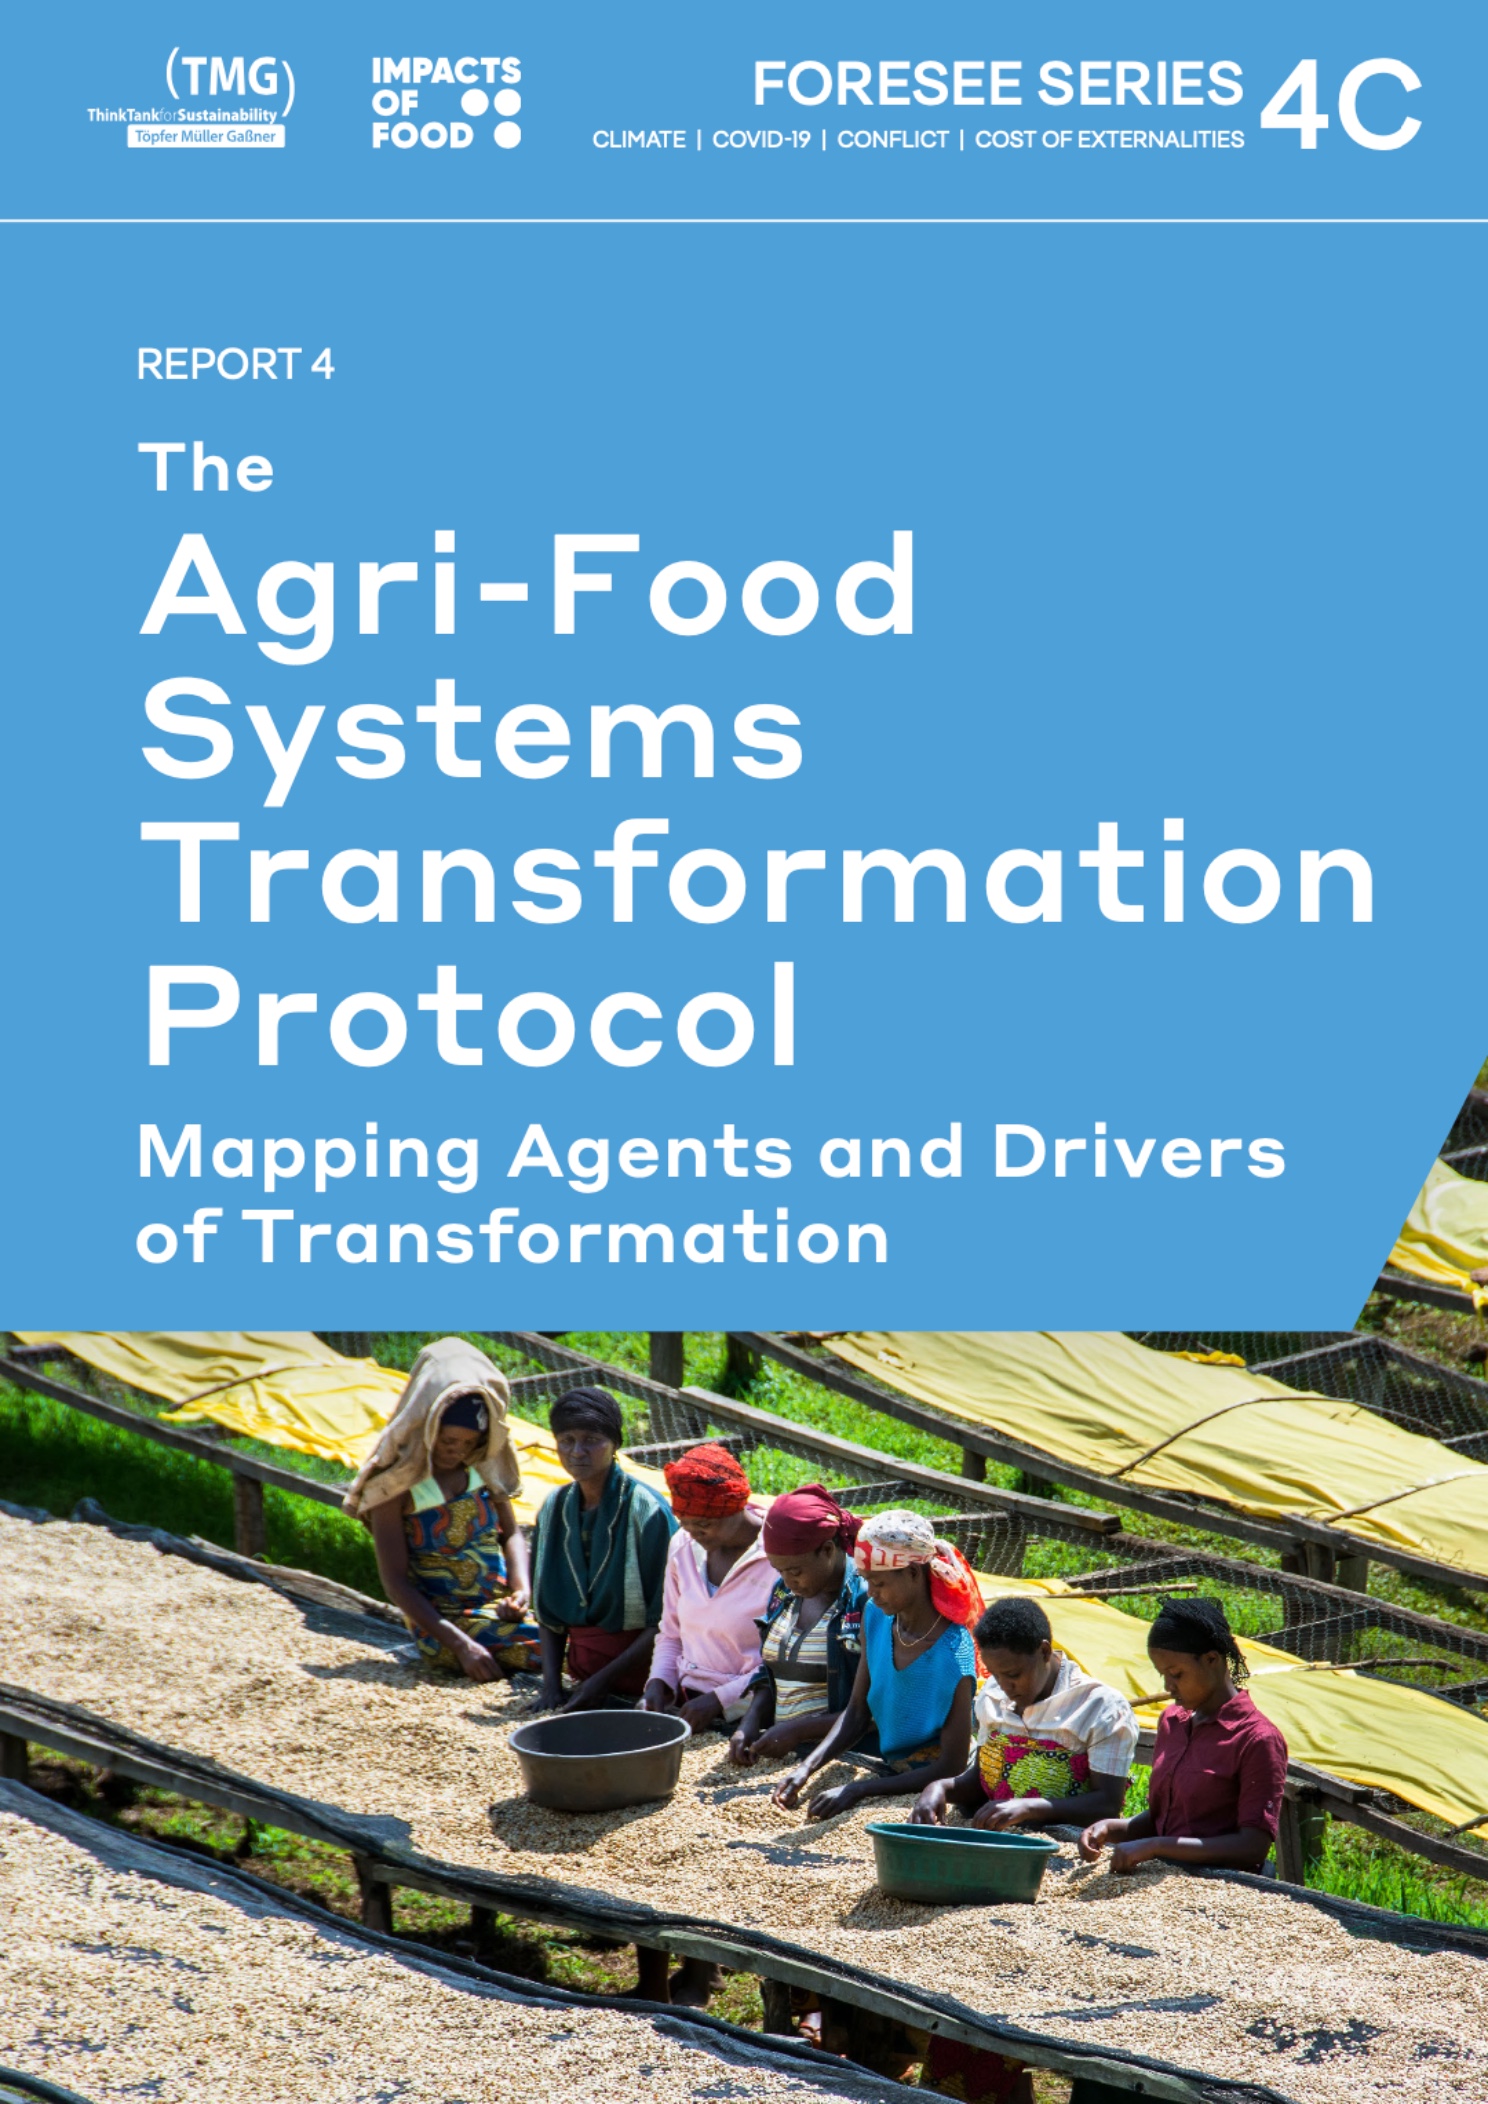 FORESEE (4C) Report 4: The Agri-Food Systems Transformation Protocol - Mapping Agents and Drivers of Transformation